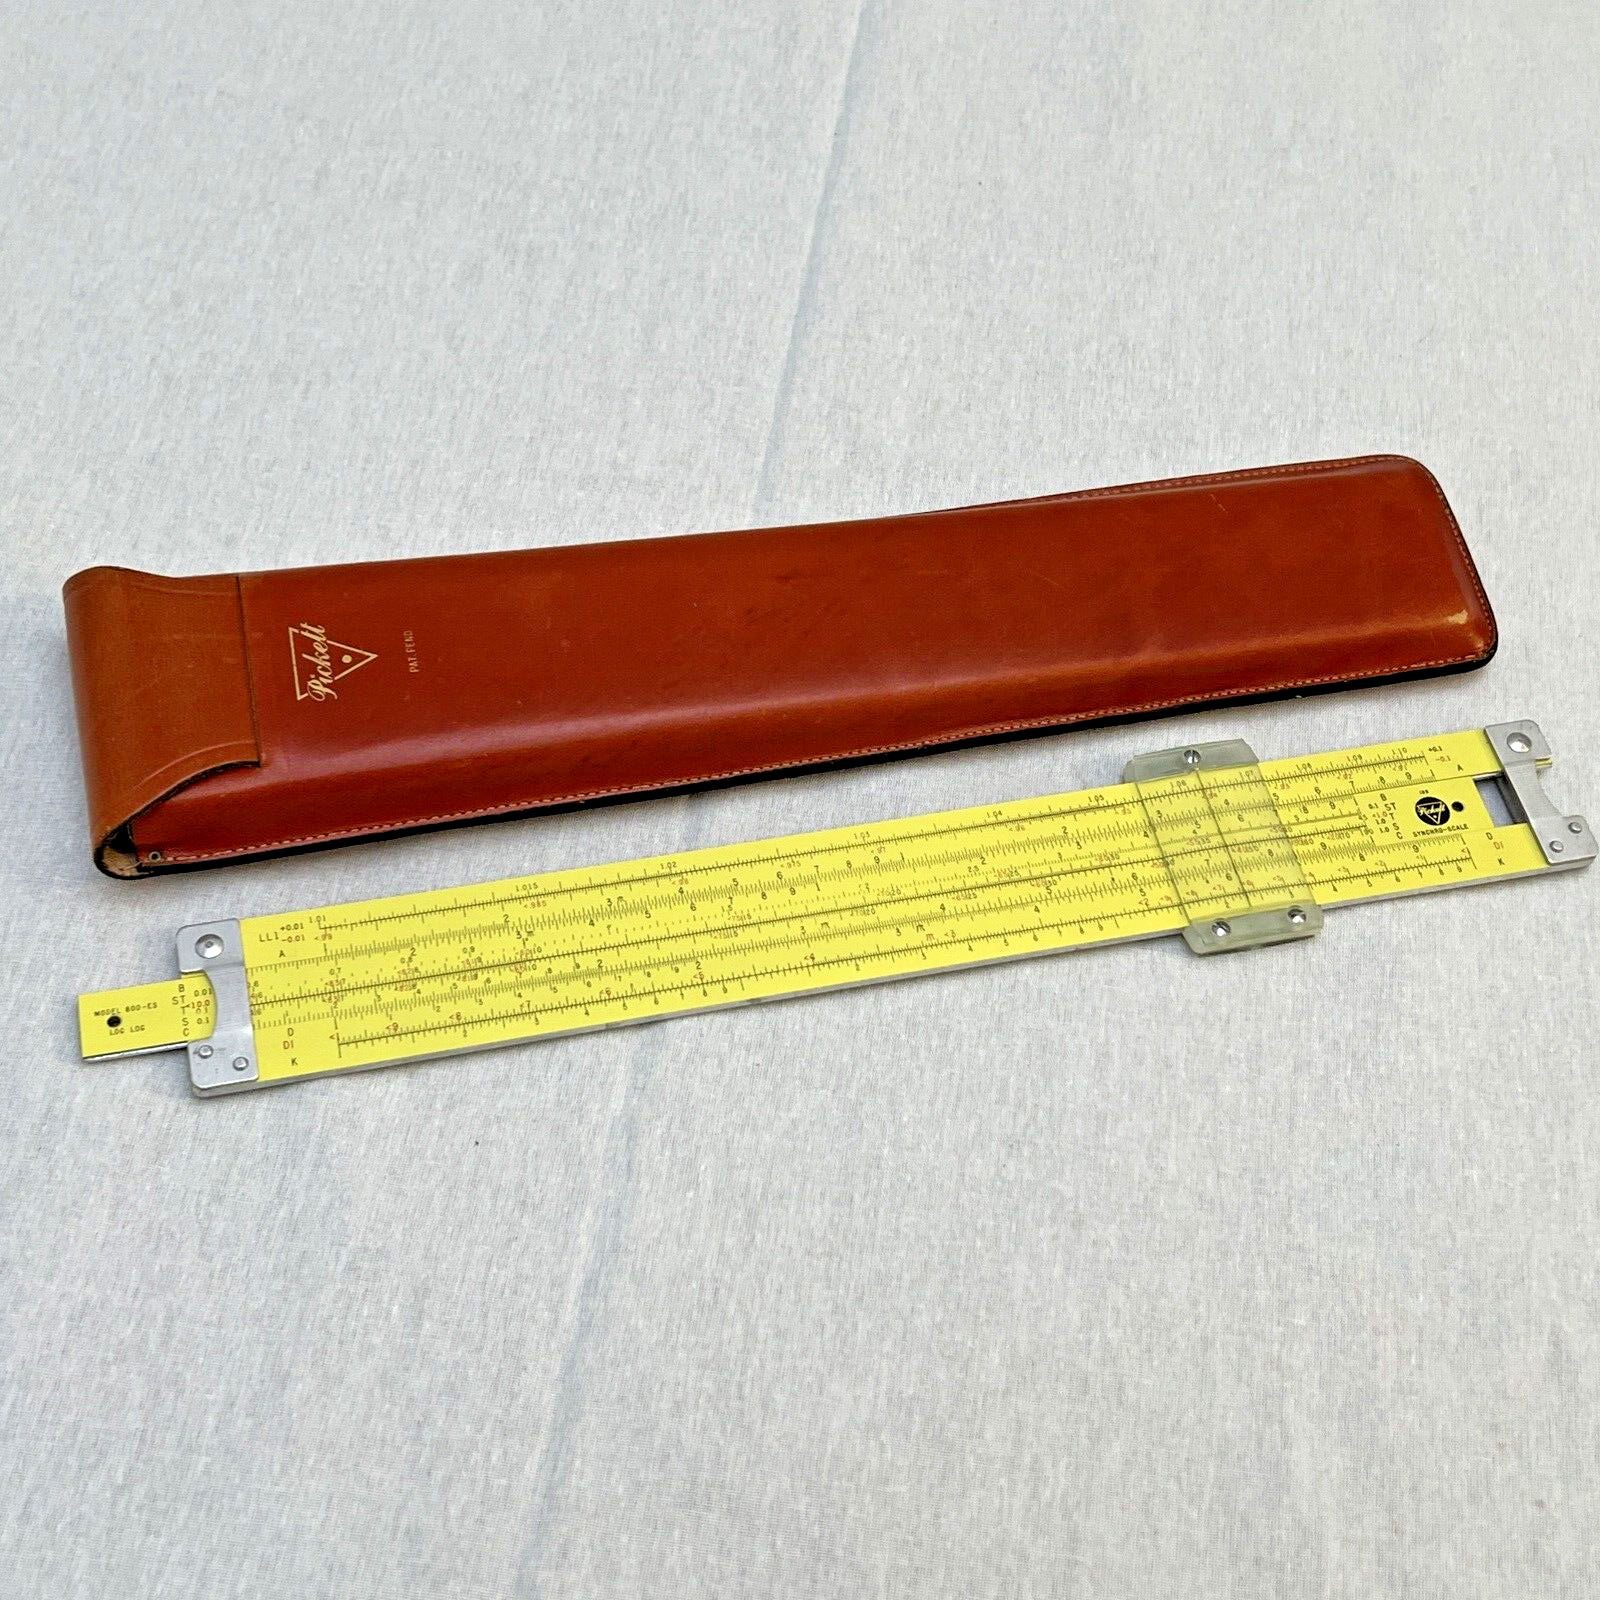 Pickett & Eckel Inc Ruler  in a red-brown leather case VGT Retro Aluminum